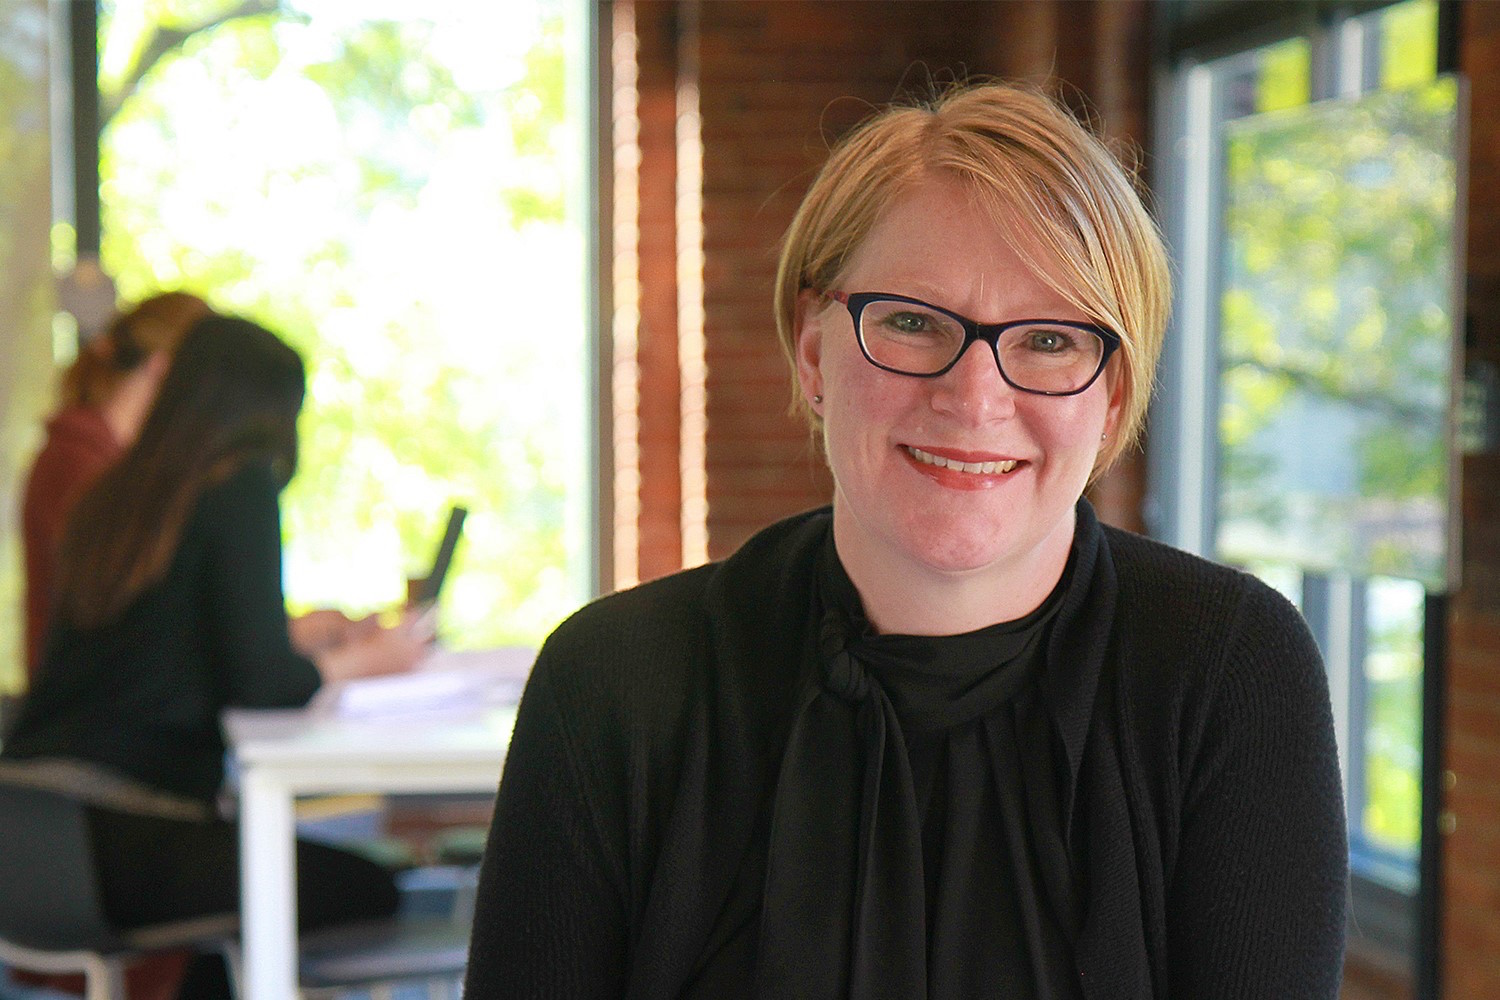 Amy Kalar, AIA, LEED AP BD+C, Senior Associate, Cuningham Group Architecture, Inc.; AIA Minnesota Women in Architecture Committee Co-Founder. Image courtesy of: Cuningham Group